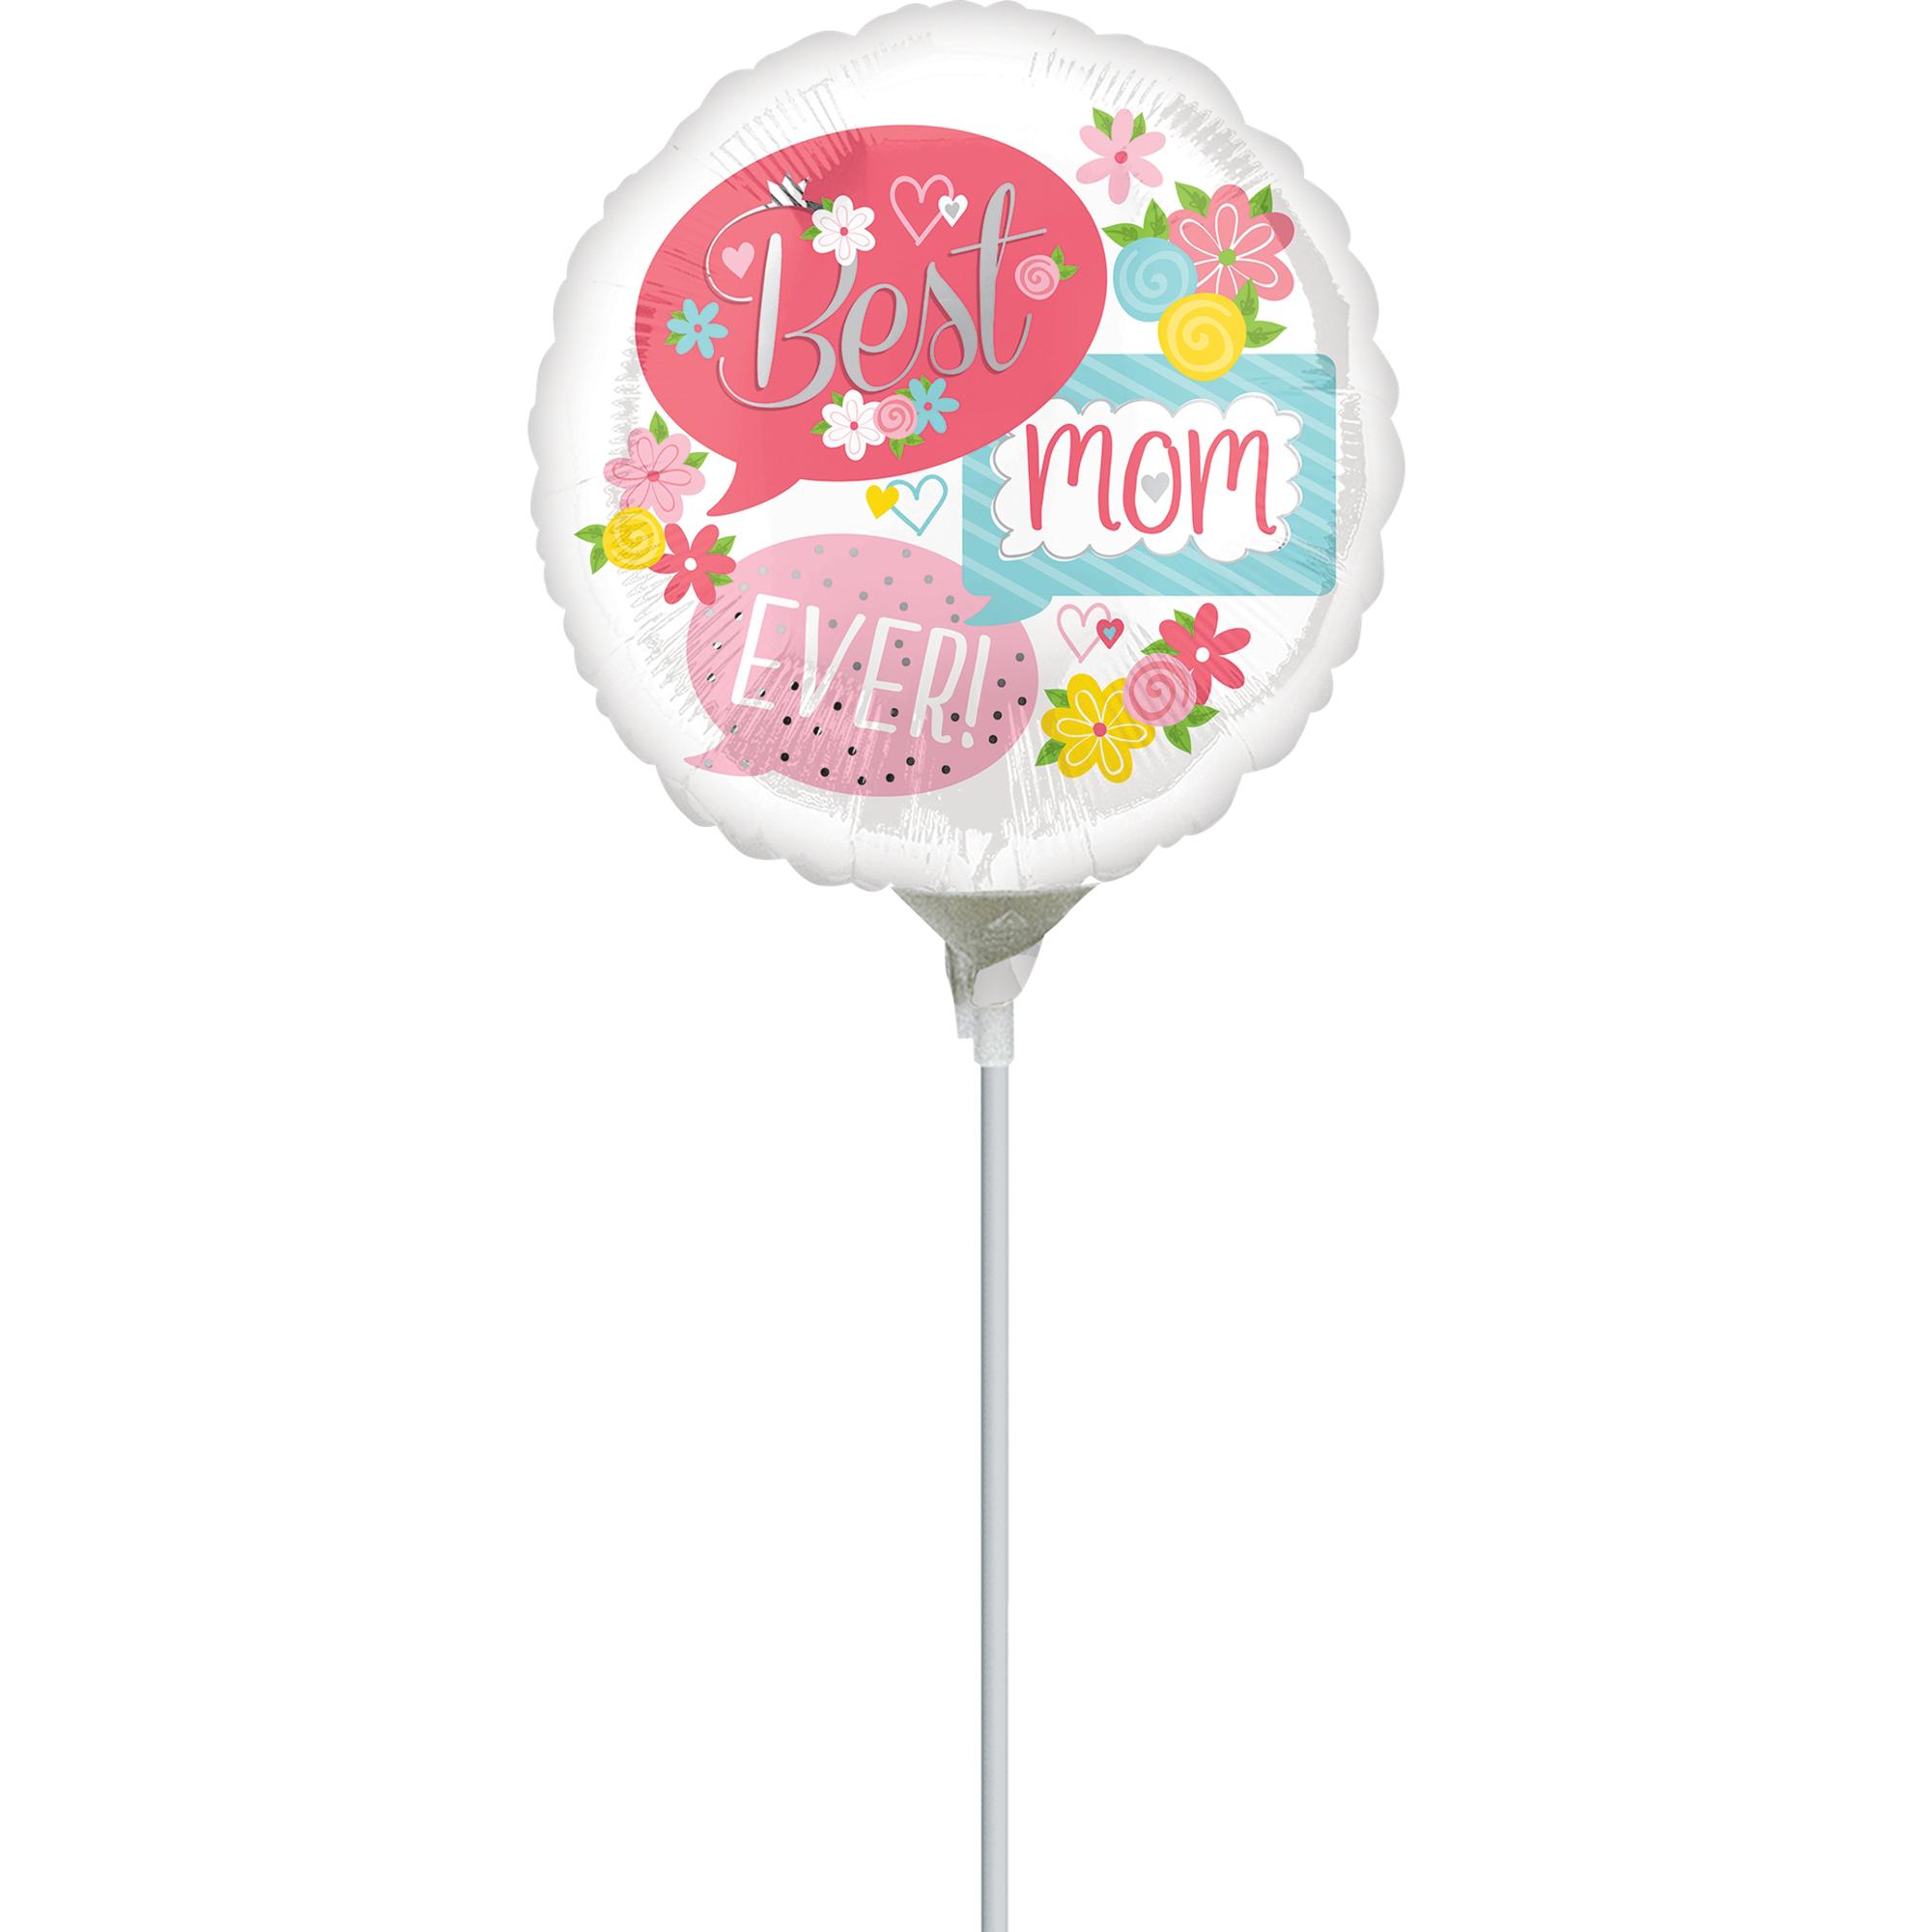 Best Mom Ever Bubbles Foil Balloon 22cm Balloons & Streamers - Party Centre - Party Centre